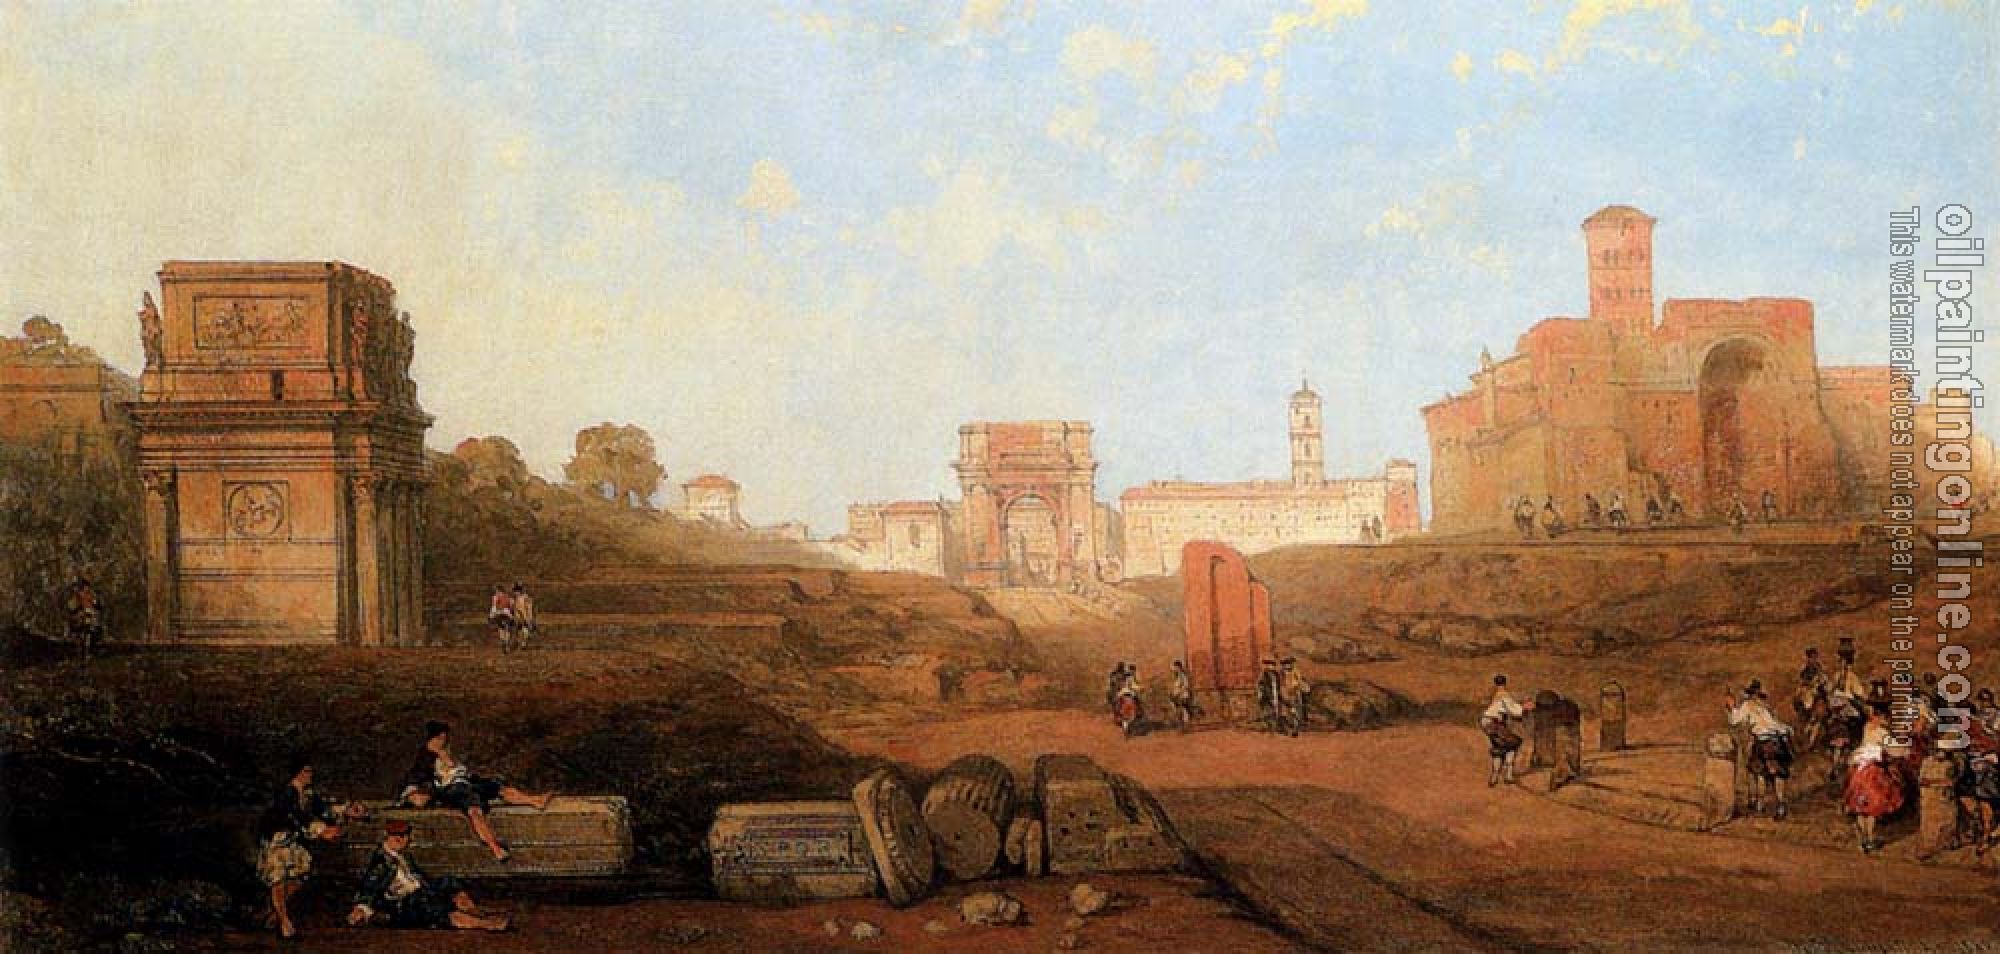 David Roberts - The Approach To The Forum